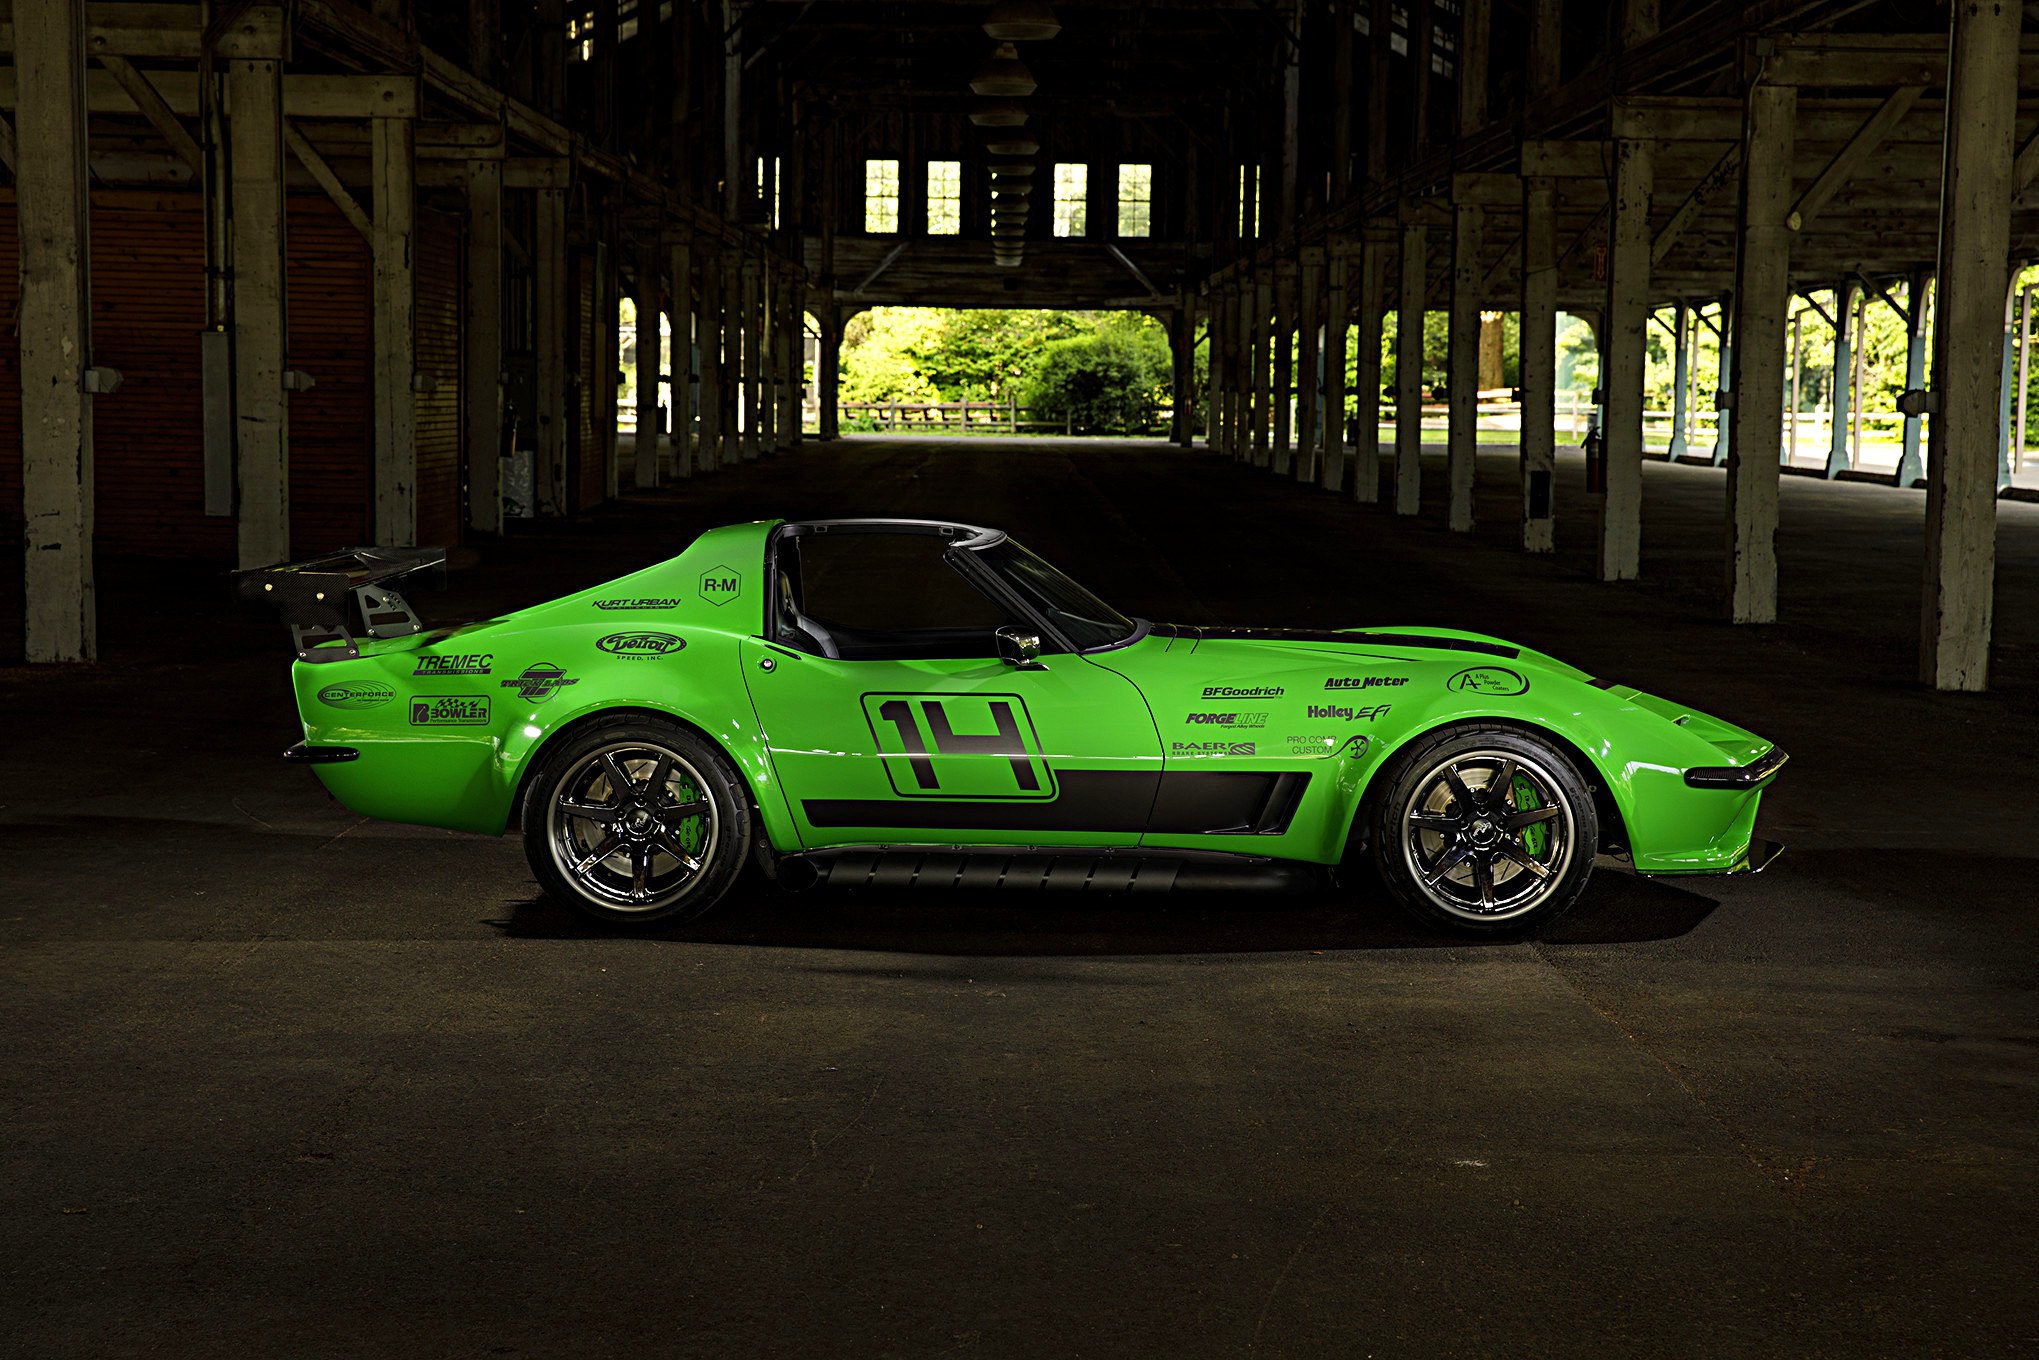 Green Debadged Chevy Corvette with Aftermarket Side Skirts - Photo by Robert McGaffin